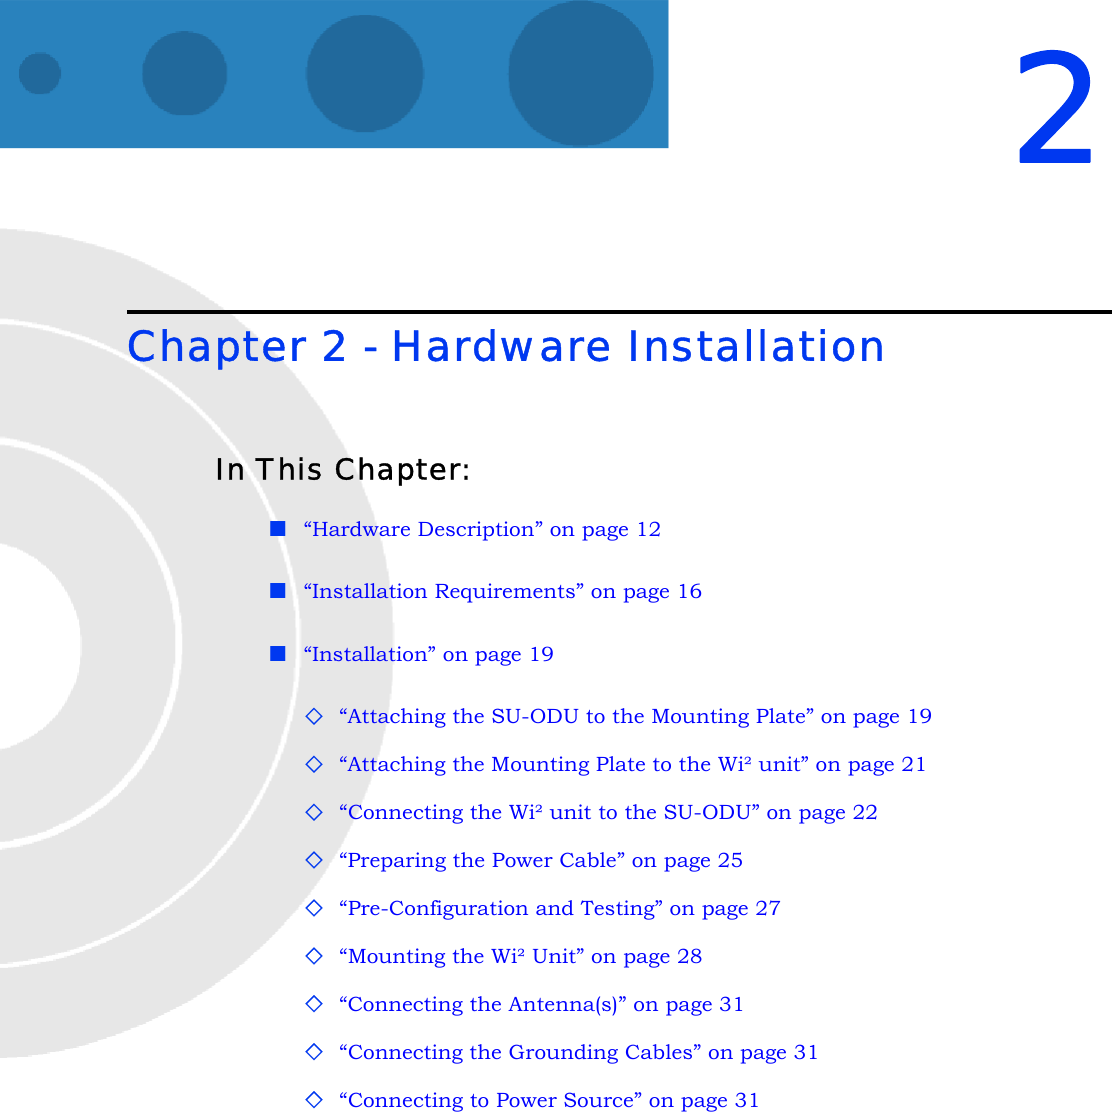 2Chapter 2 - Hardware InstallationIn This Chapter:“Hardware Description” on page 12“Installation Requirements” on page 16“Installation” on page 19“Attaching the SU-ODU to the Mounting Plate” on page 19“Attaching the Mounting Plate to the Wi² unit” on page 21“Connecting the Wi² unit to the SU-ODU” on page 22“Preparing the Power Cable” on page 25“Pre-Configuration and Testing” on page 27“Mounting the Wi² Unit” on page 28“Connecting the Antenna(s)” on page 31“Connecting the Grounding Cables” on page 31“Connecting to Power Source” on page 31